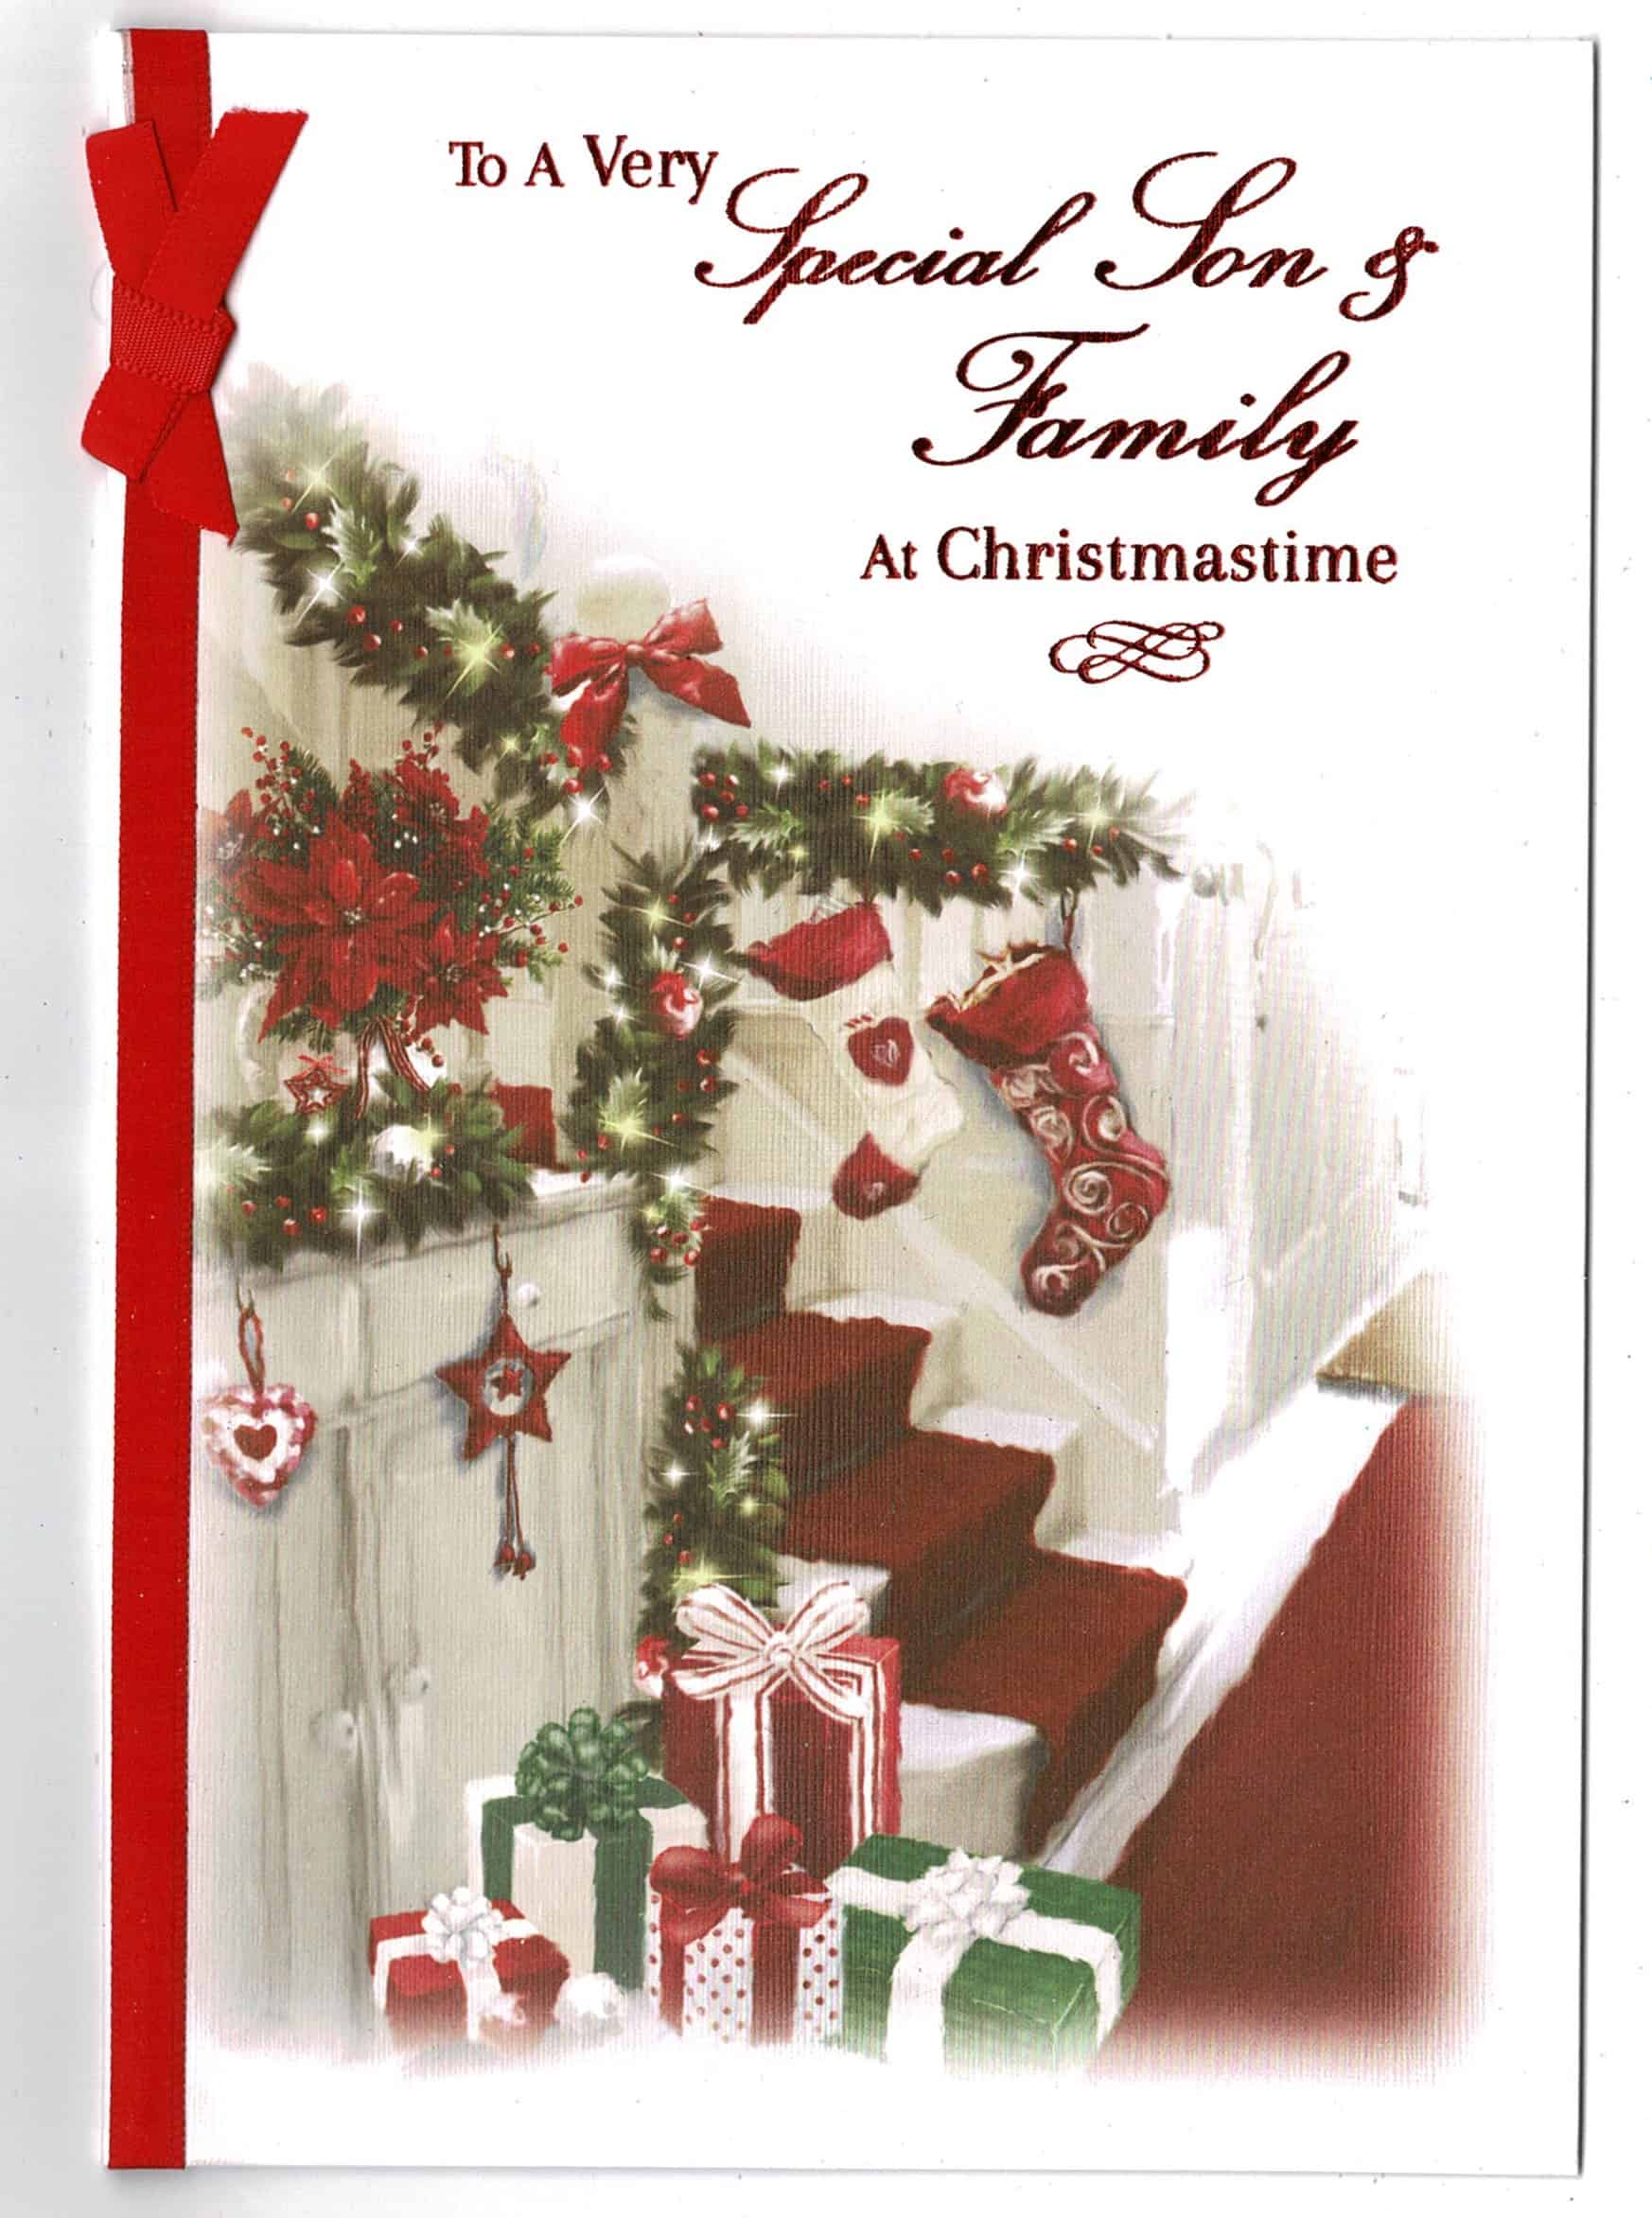 Son And Family Christmas Card ' To A Very Special Son And Family